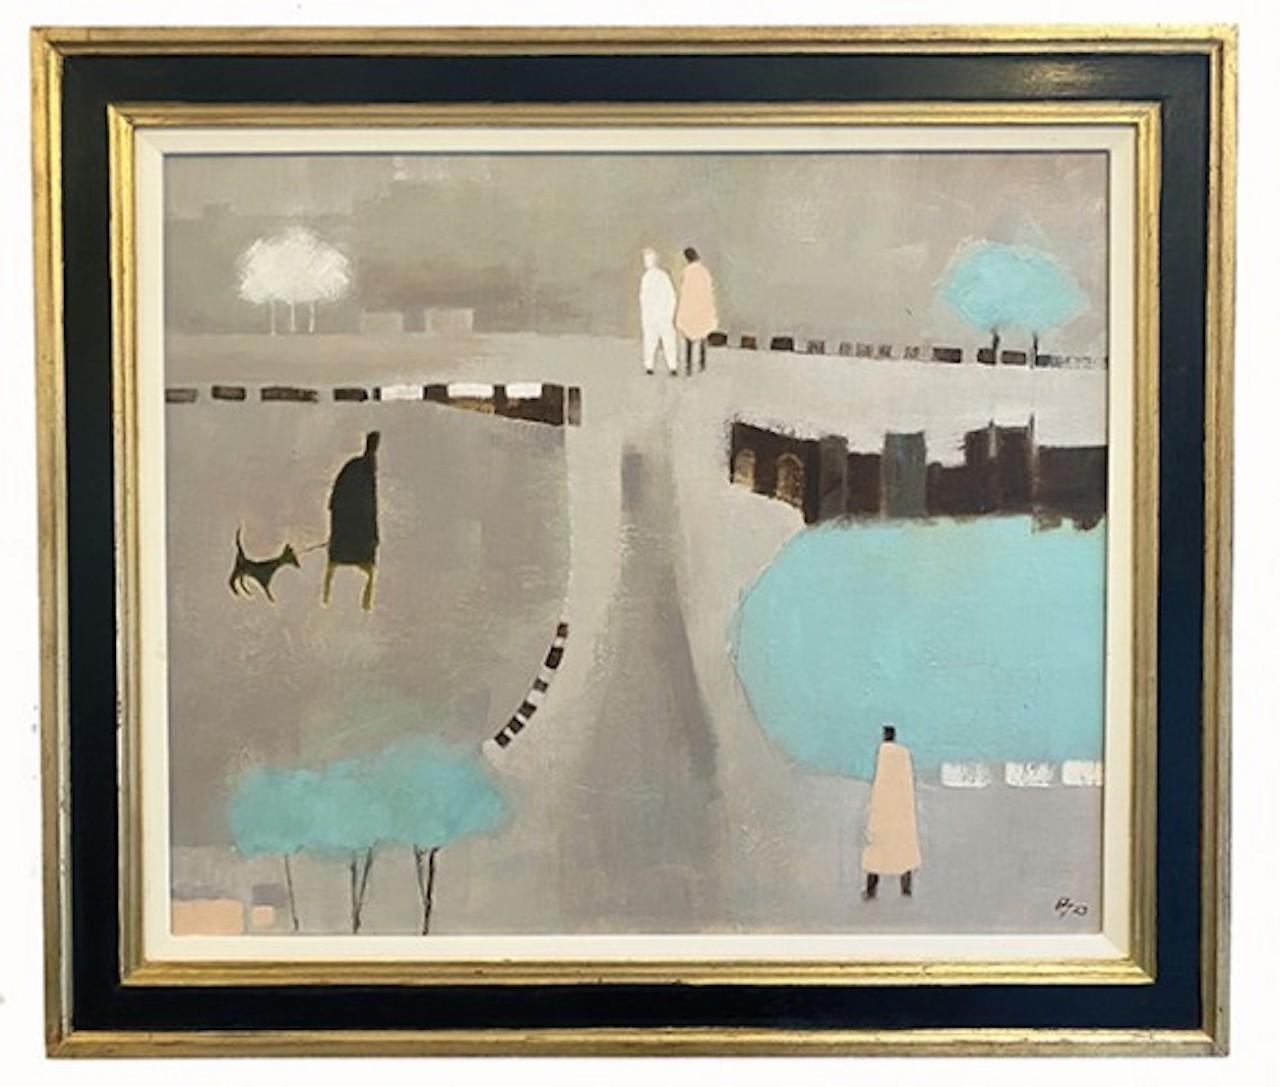 Figurative landscape set in a park

Discover beautiful artwork by Ana Bianchi online with Wychwood Art. Originally trained as a designer in Paris, Ana Bianchi later studied fine art at Chelsea, the Byam Shaw and Central St Martin’s in London.    In